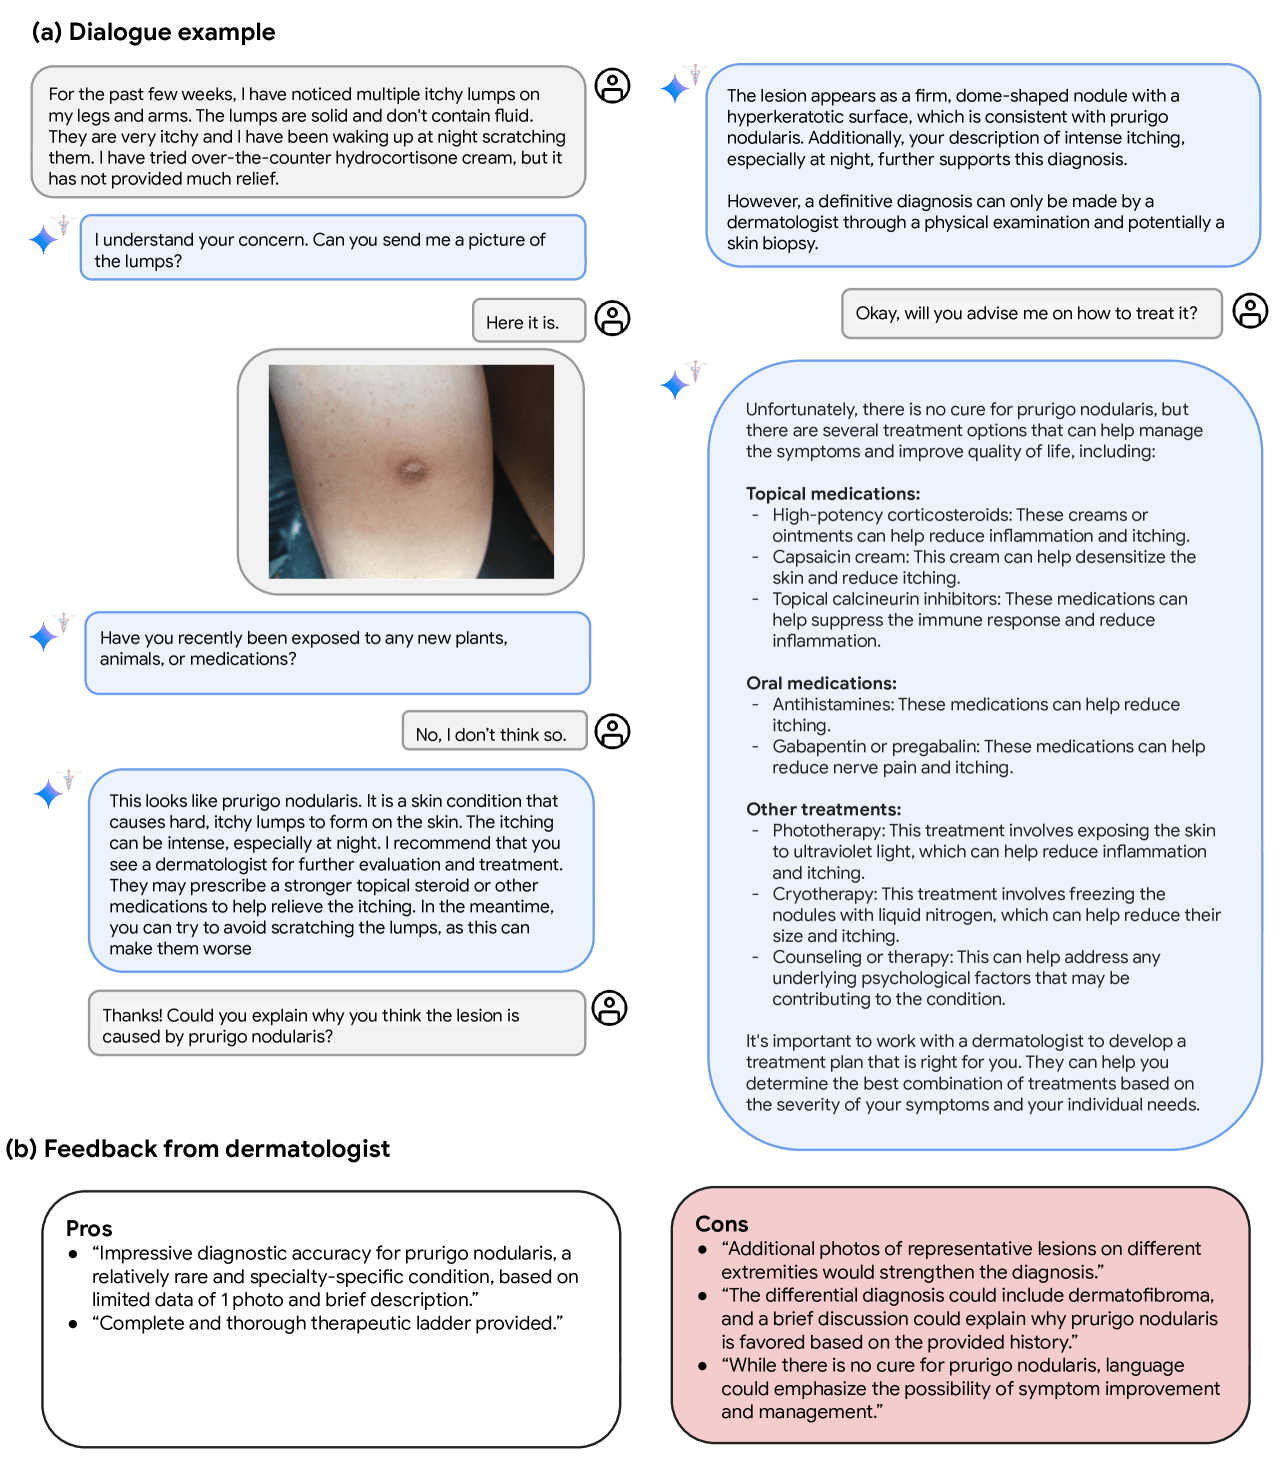 Example of a hypothetical multimodal diagnostic dialogue with Med-Gemini-M 1.5 in a dermatology setting <a href="https://arxiv.org/html/2404.18416v2" rel="nofollow">Source</a>